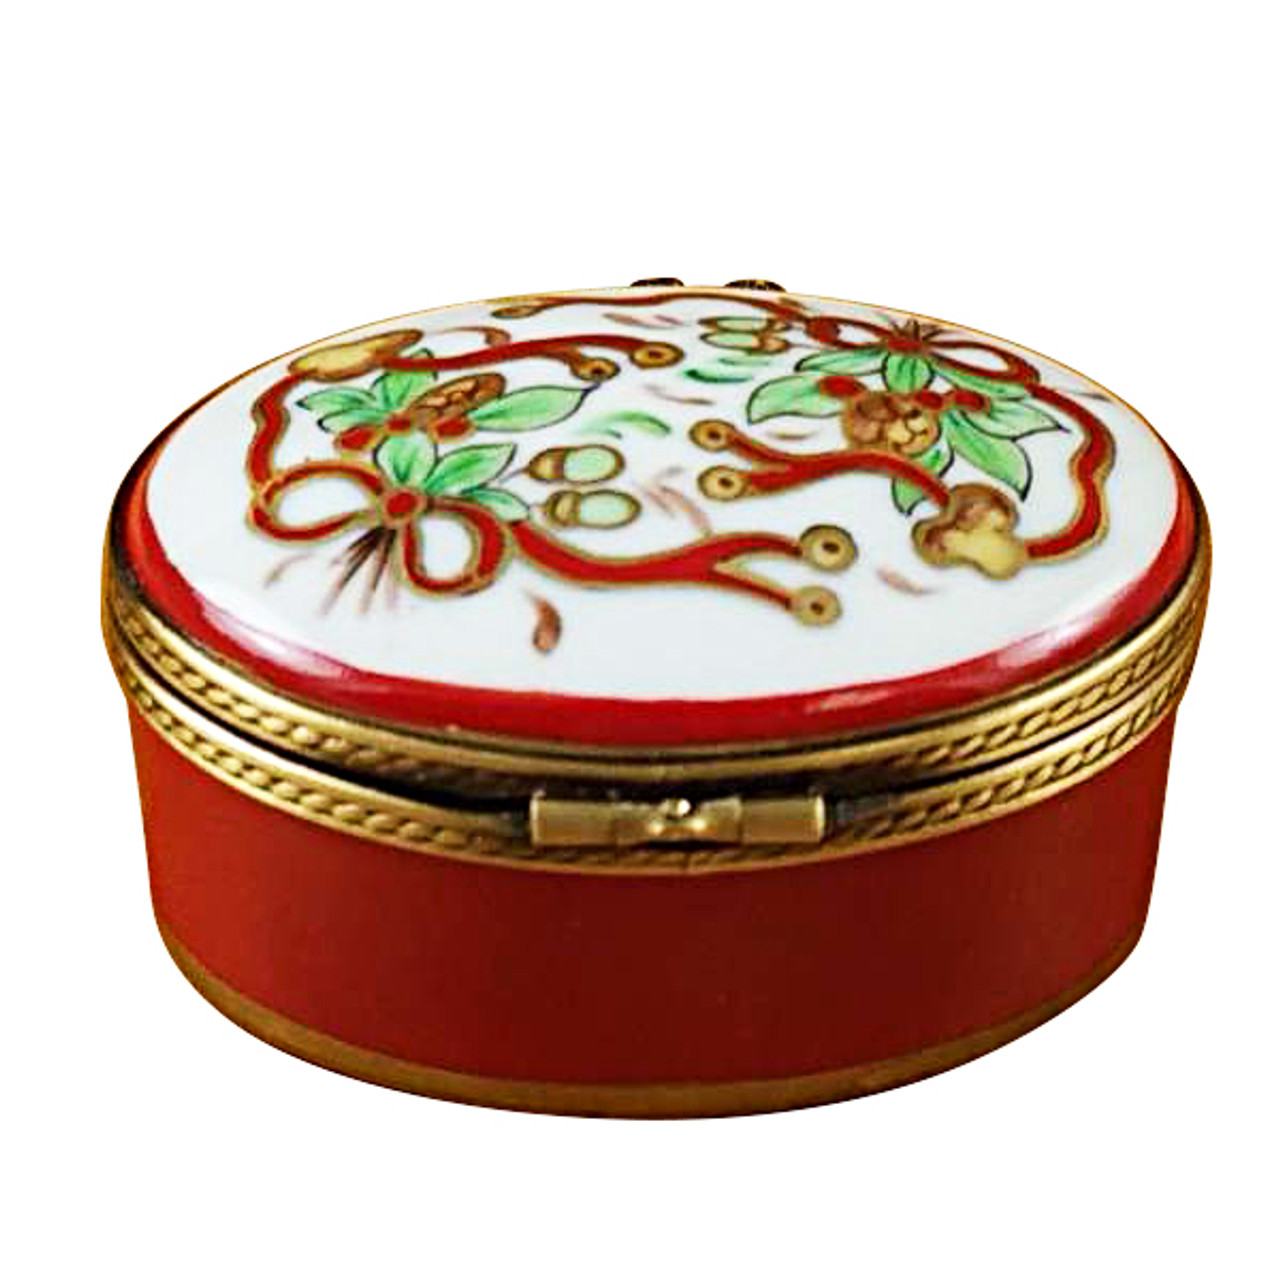 Oval - Merry Christmas Rochard Limoges Box RX005